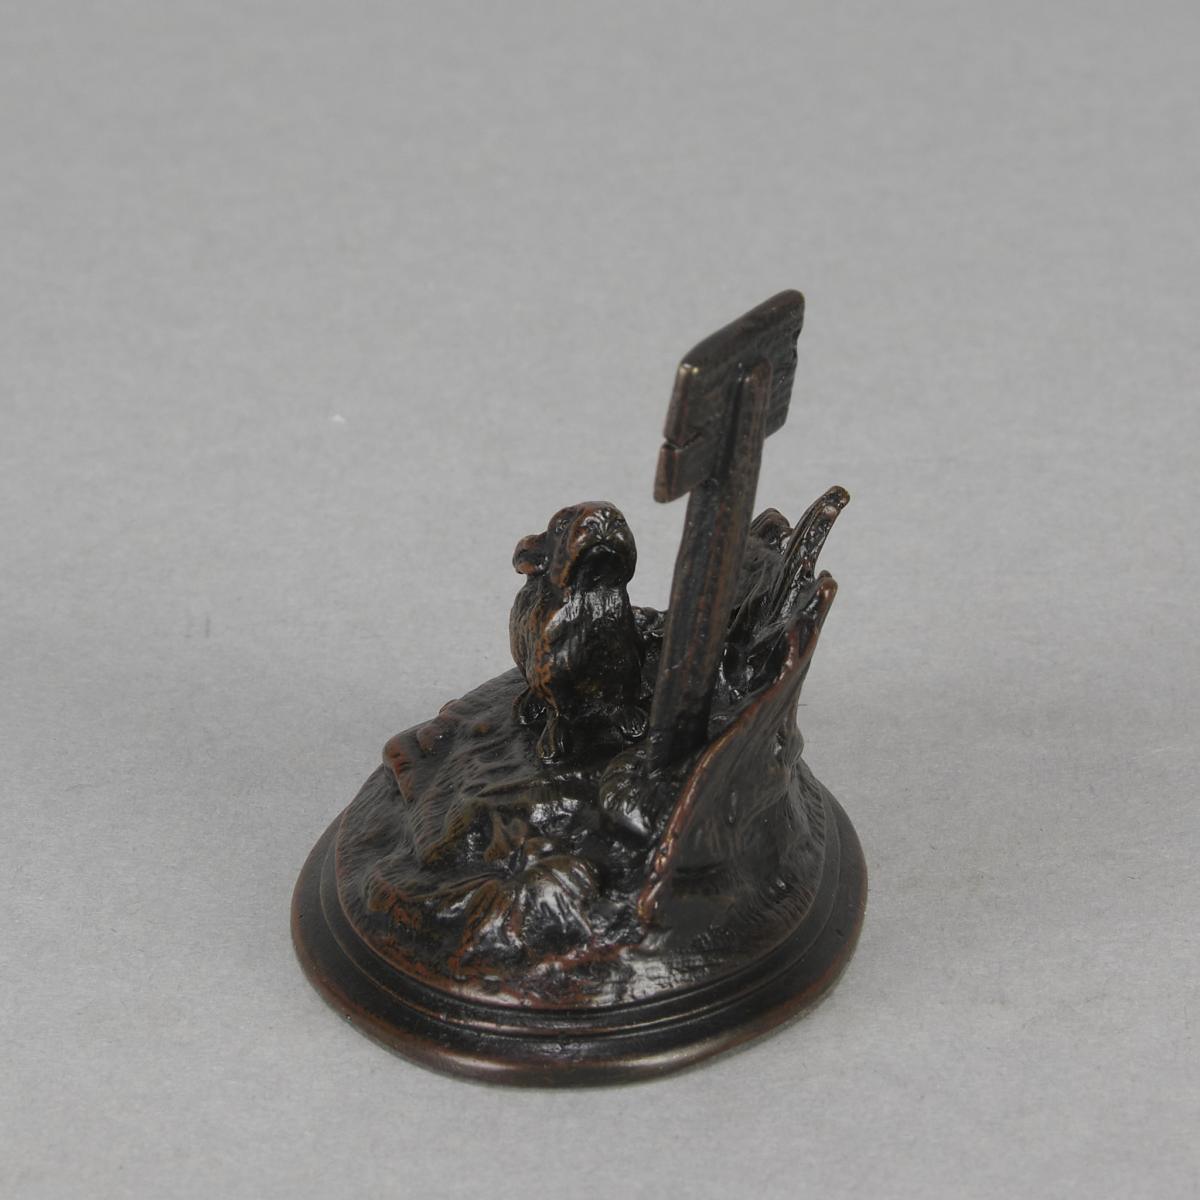  Early 20th Century French Animalier Bronze entitled "Worried Rabbit"